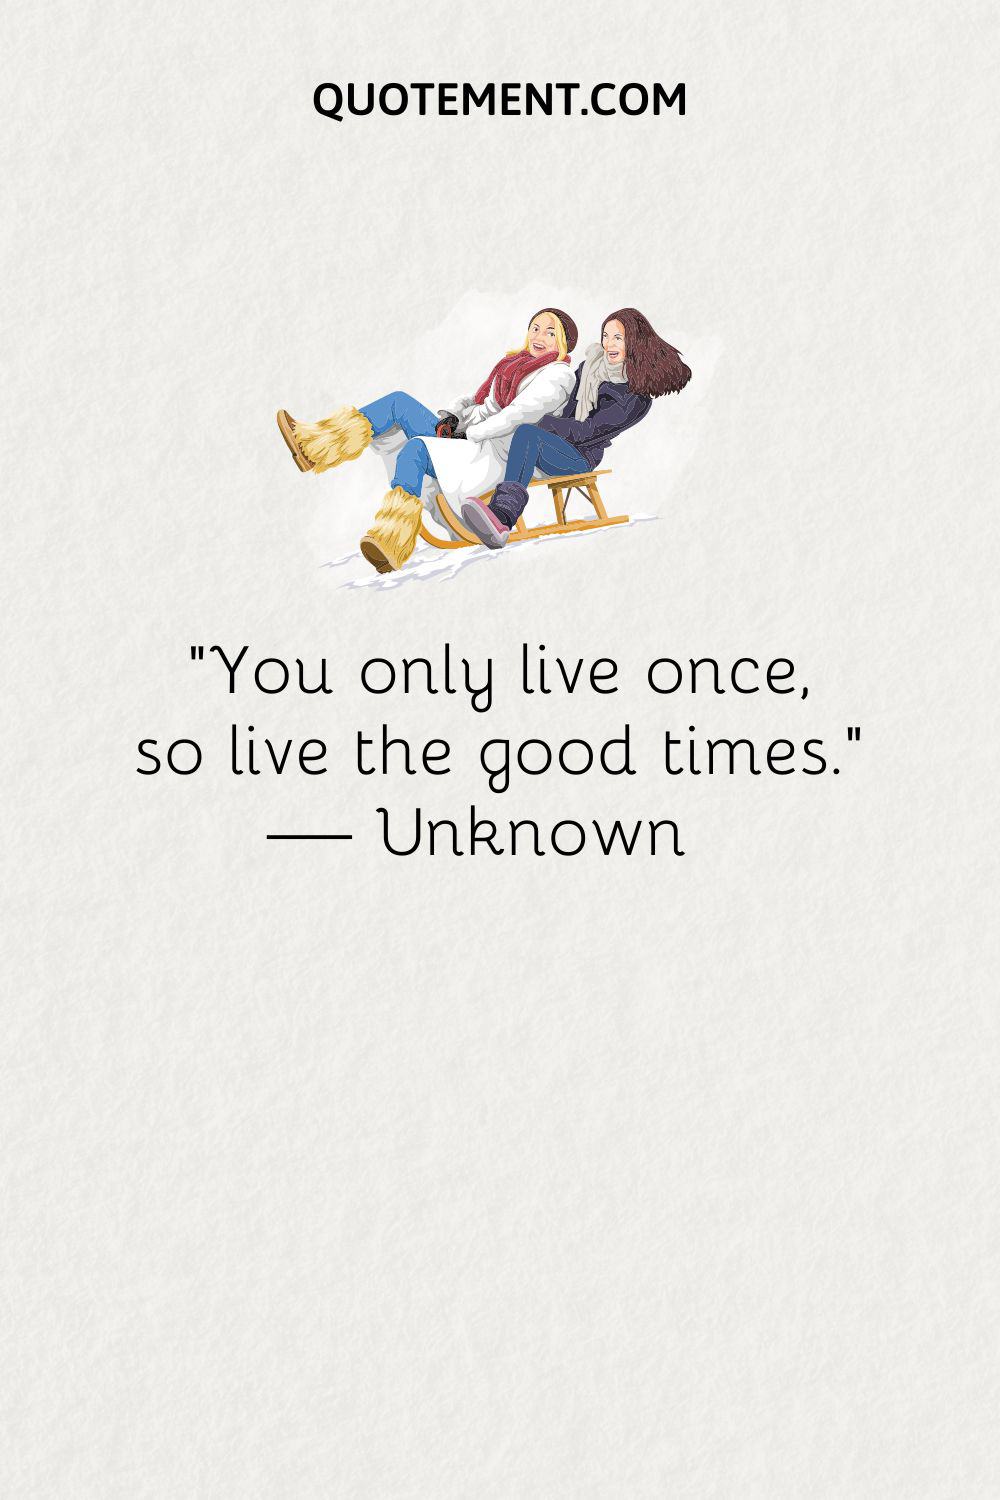 “You only live once, so live the good times.” — Unknown